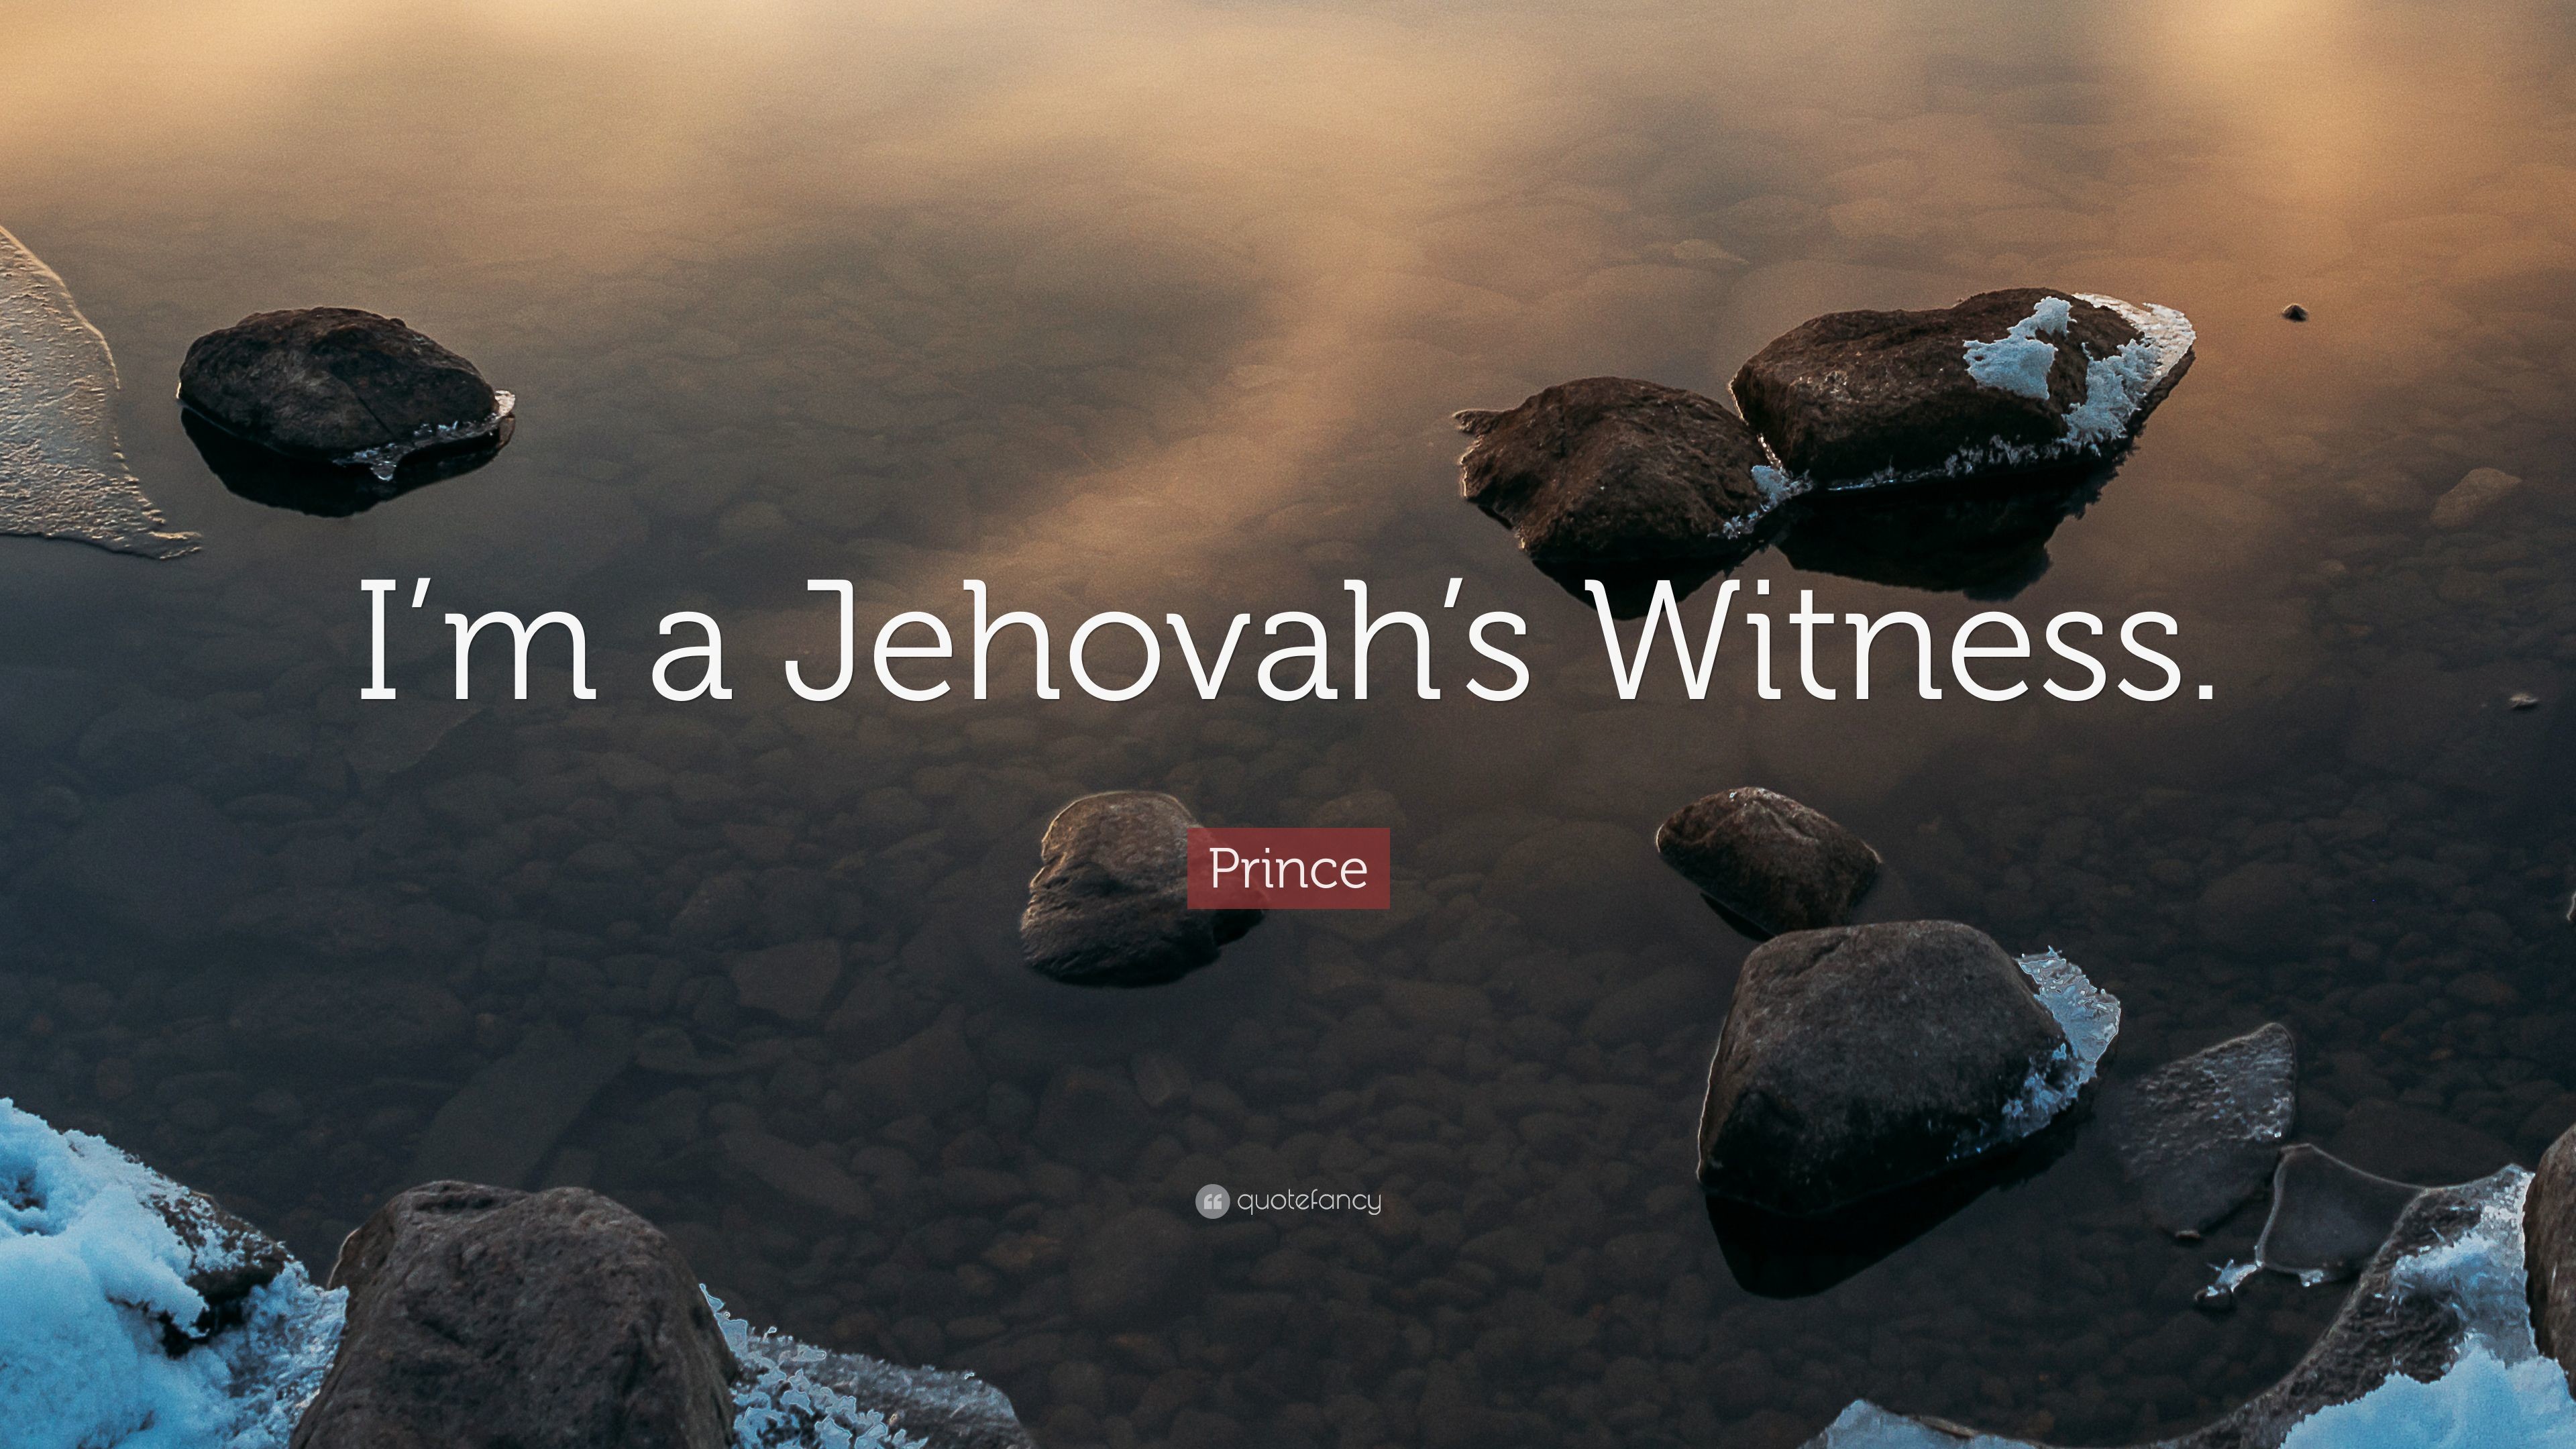 3840x2160 Prince Quote: “I'm a Jehovah's Witness.”